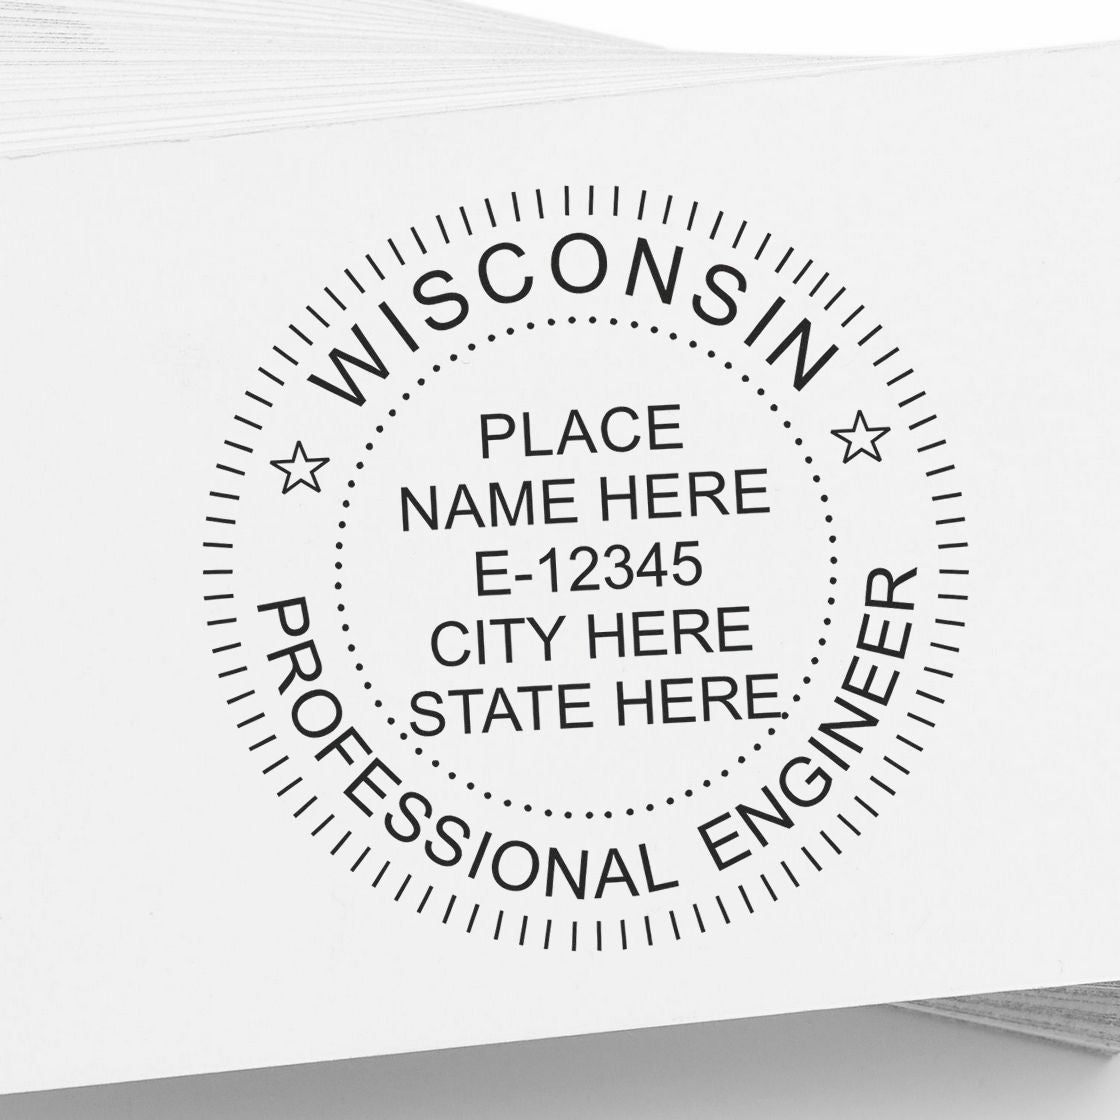 A stamped impression of the Self-Inking Wisconsin PE Stamp in this stylish lifestyle photo, setting the tone for a unique and personalized product.